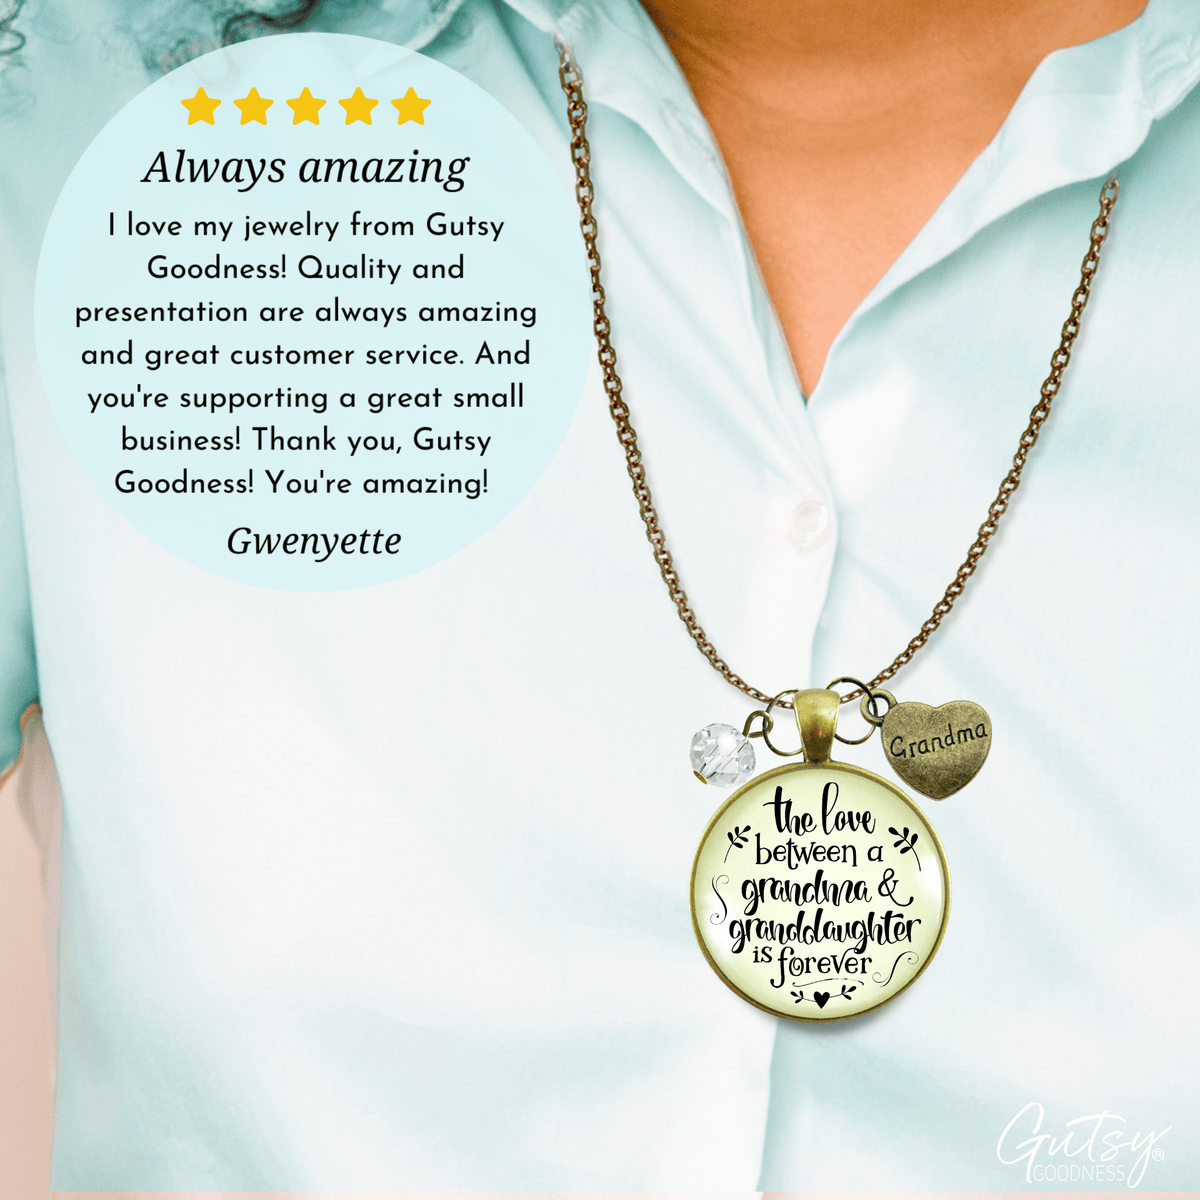 Gutsy Goodness To Grandmother Necklace Love Between A Grandma Is Forever Infinity Jewelry Gift - Gutsy Goodness Handmade Jewelry;To Grandmother Necklace Love Between A Grandma Is Forever Infinity Jewelry Gift - Gutsy Goodness Handmade Jewelry Gifts